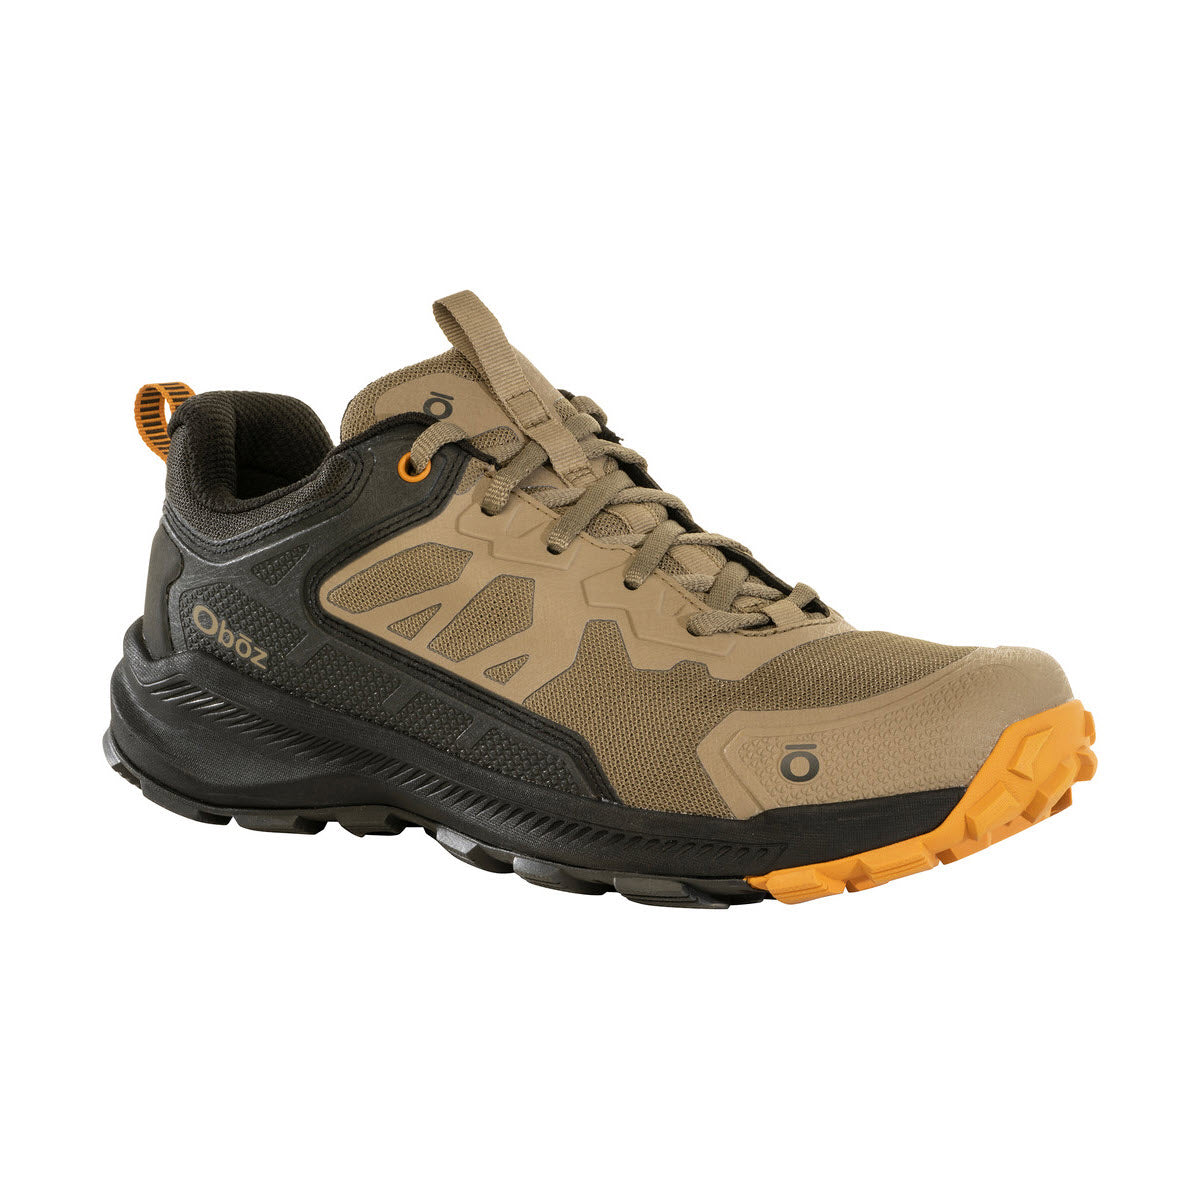 A single tan OBOZ KATABATIC LOW THICKET - MENS hiking trail shoe with orange and black accents, featuring a rugged sole and lace-up front.